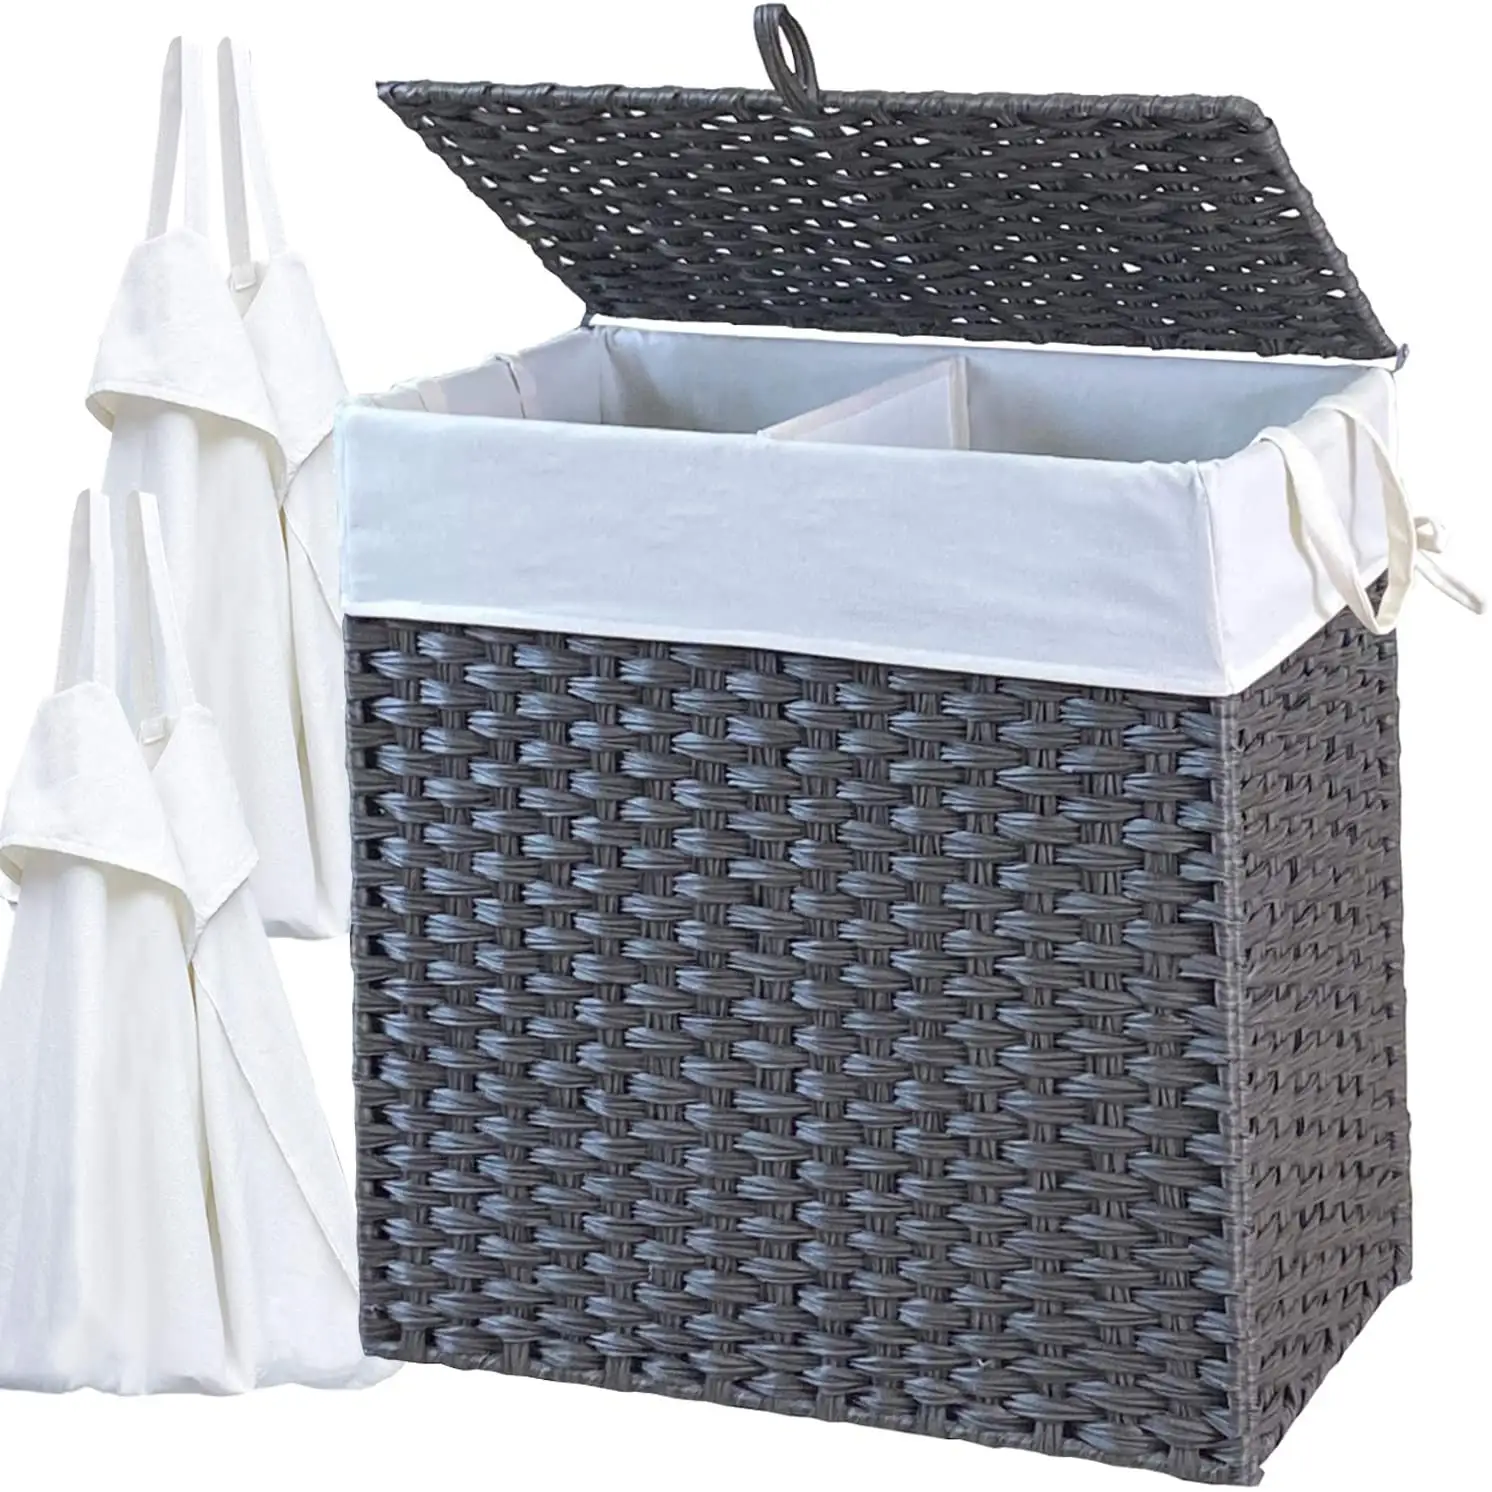 10% OFF! Plastic Laundry Hamper folding storage basketDirty Clothes Synthetic Rattan Laundry Basket with liner bag